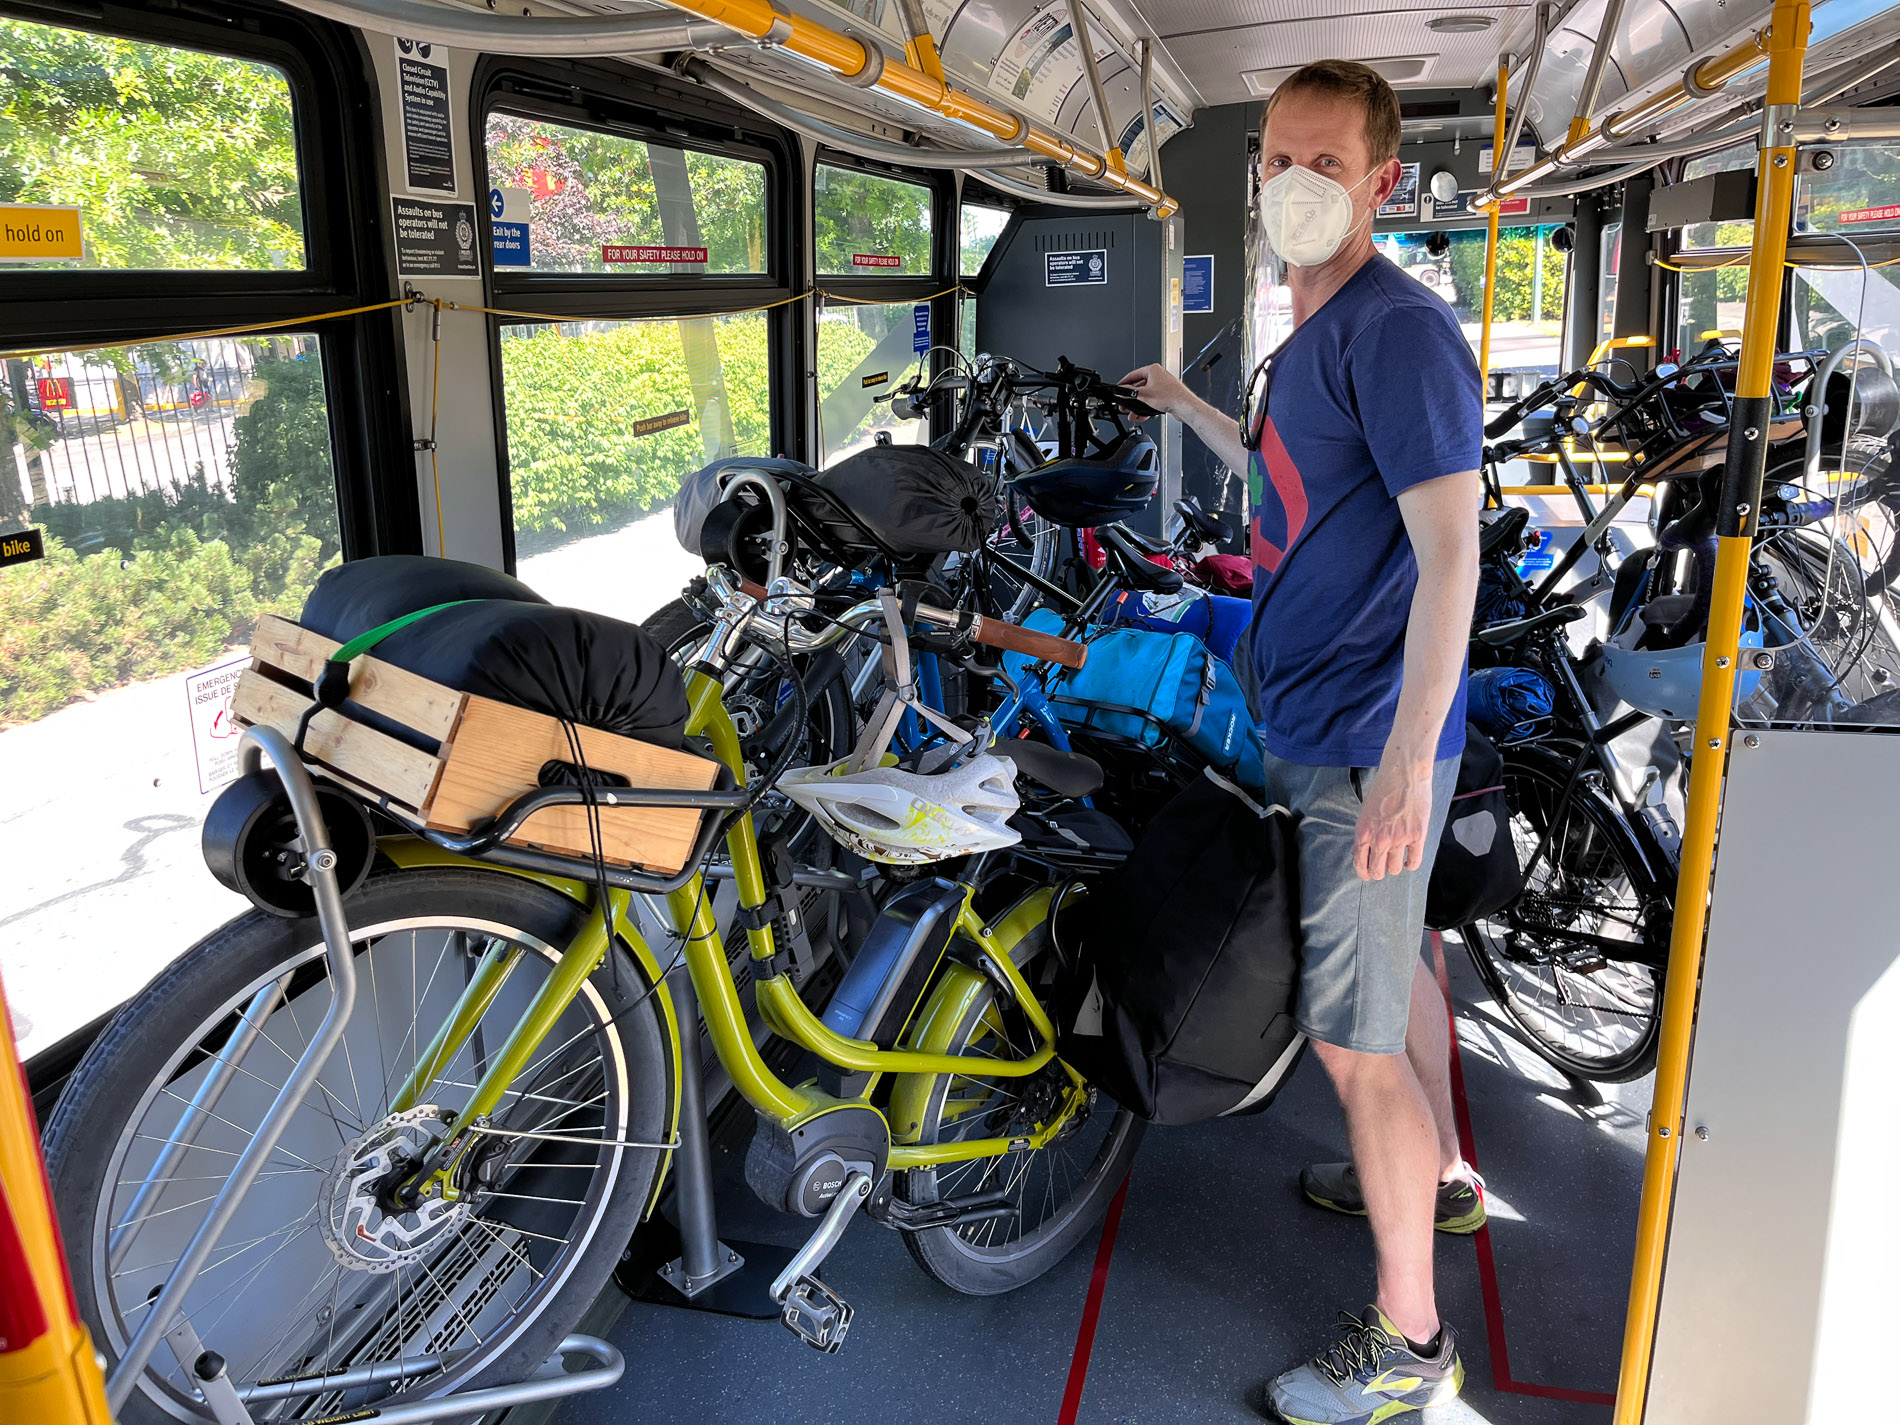 Dylan on a bus surrounded by a variety of bikes.